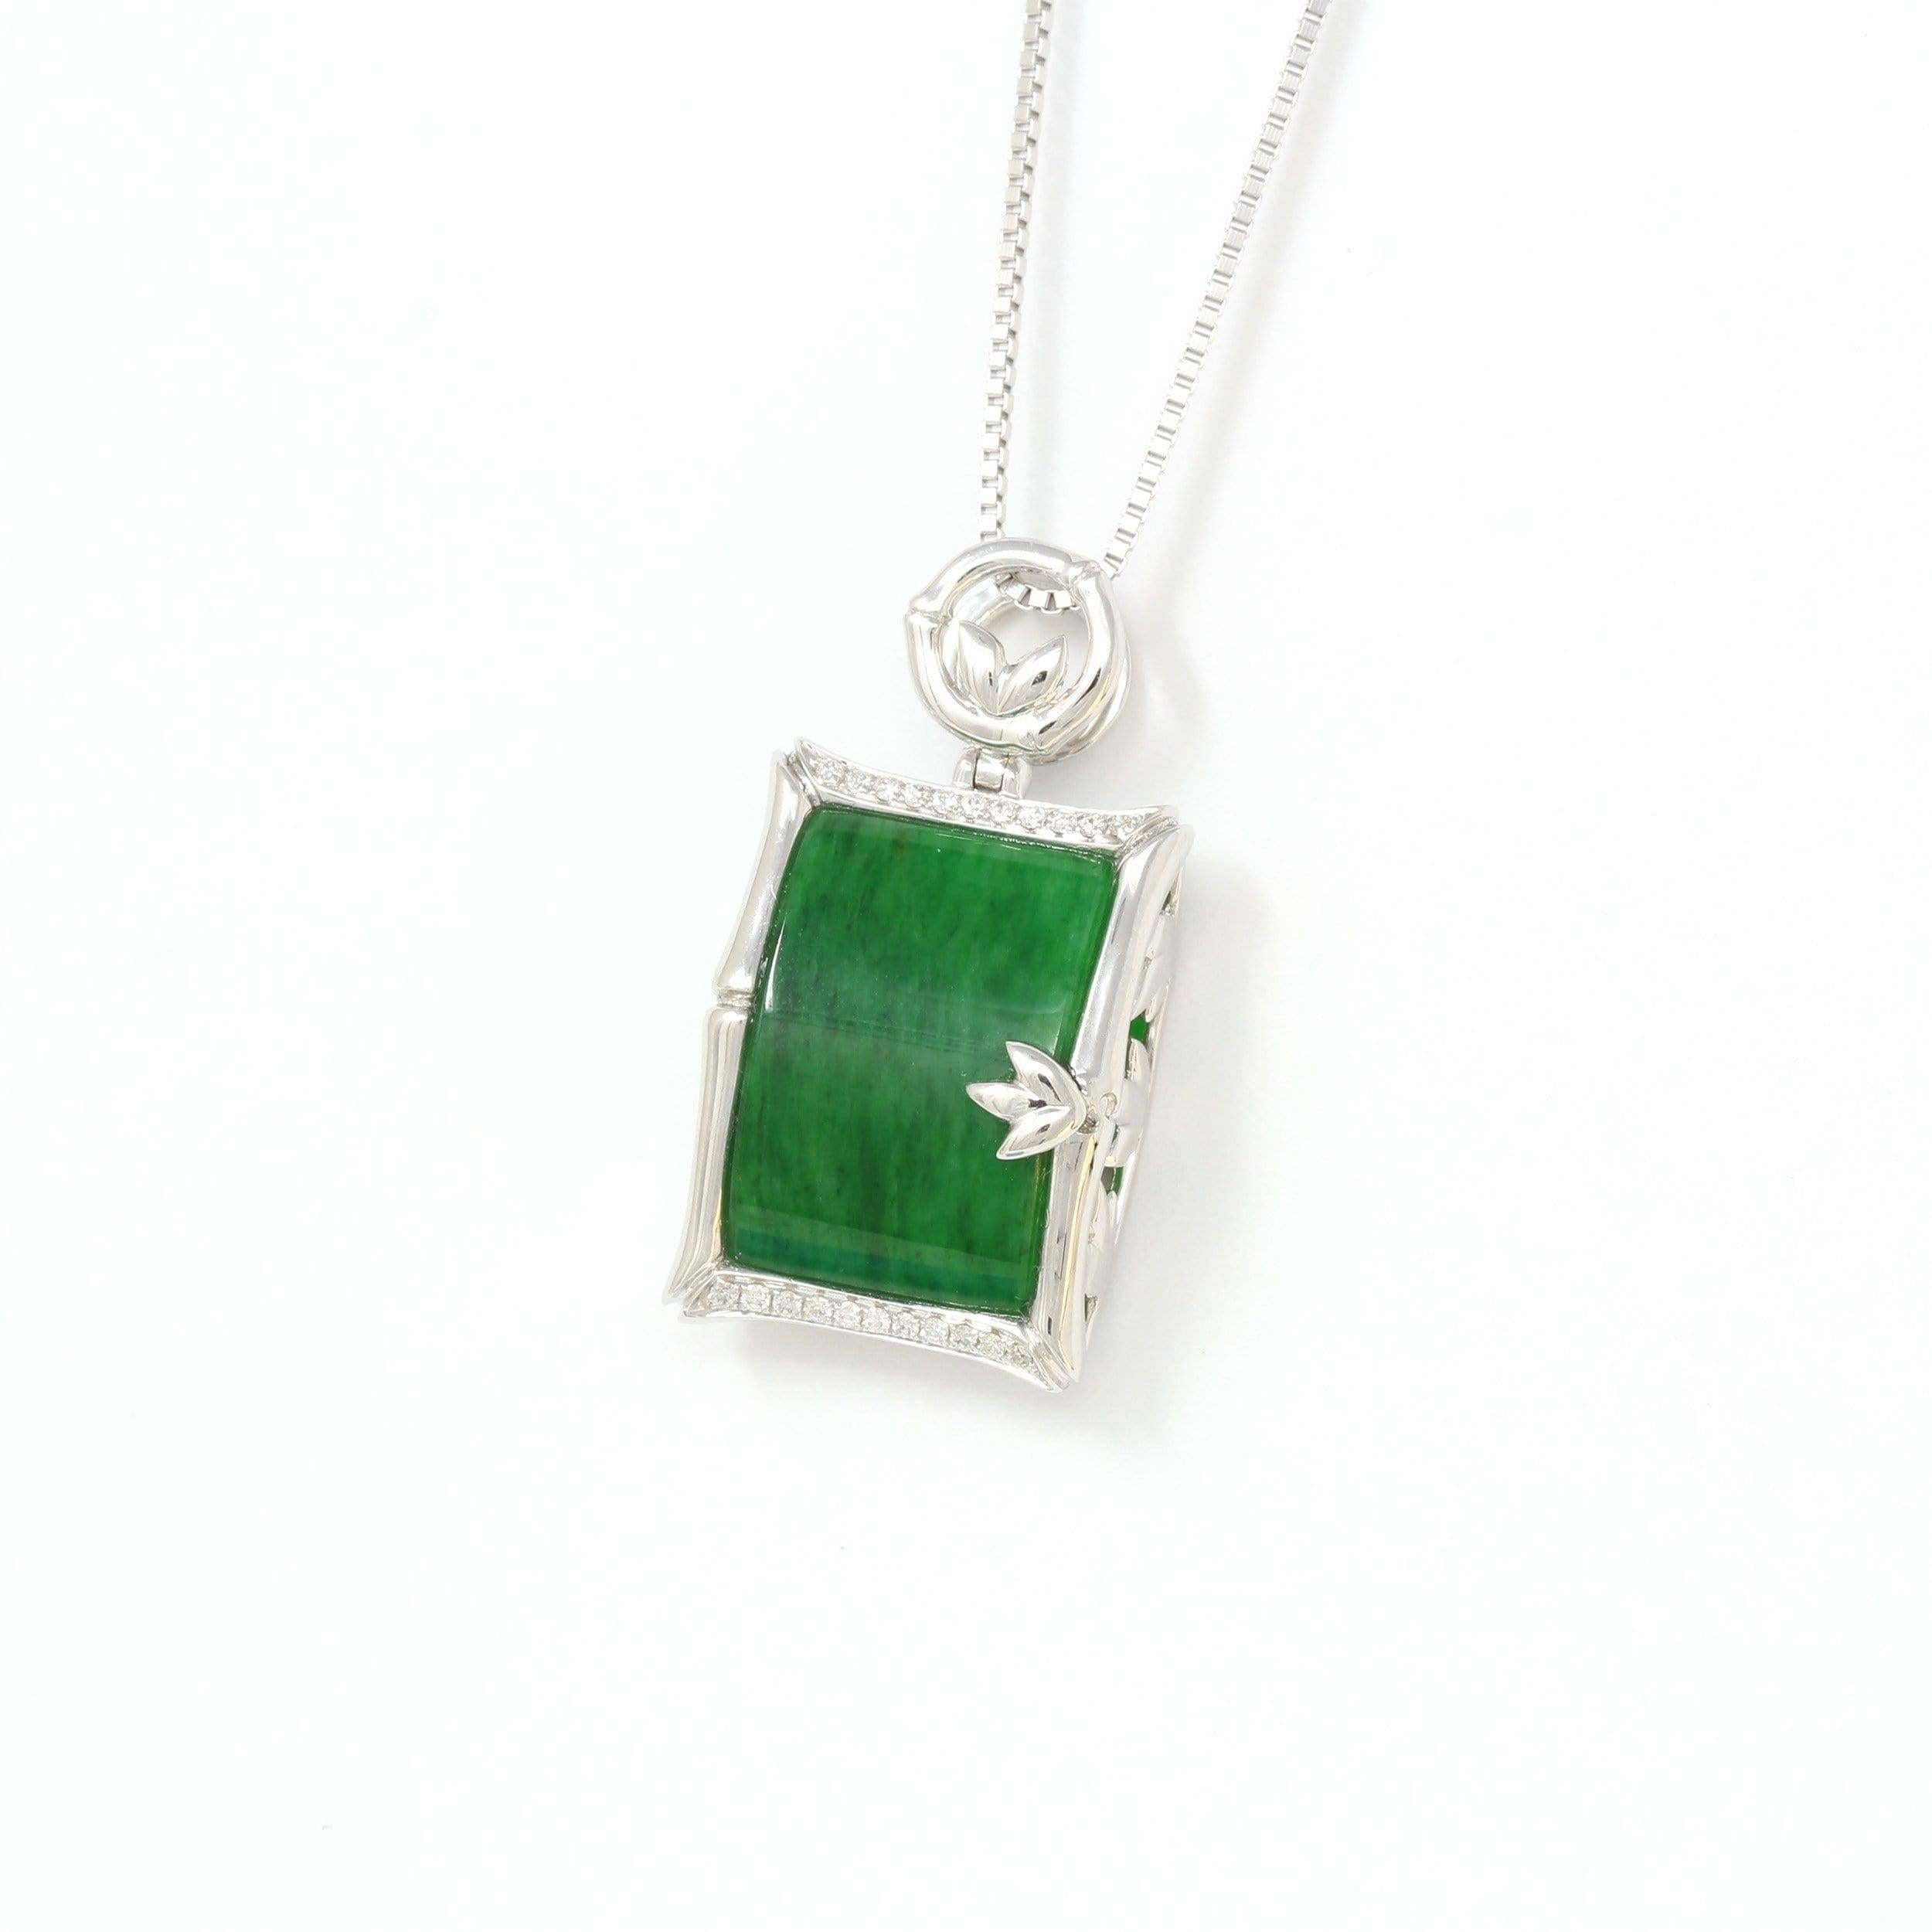 DESIGN CONCEPT--- This 18k gold necklace is made with genuine green Burmese jadeite that is truly one of a kind, 3.00 ct of rich, green color. The design was inspired by the simplistic concept of bamboo. Representing prosperous energies. The pendant